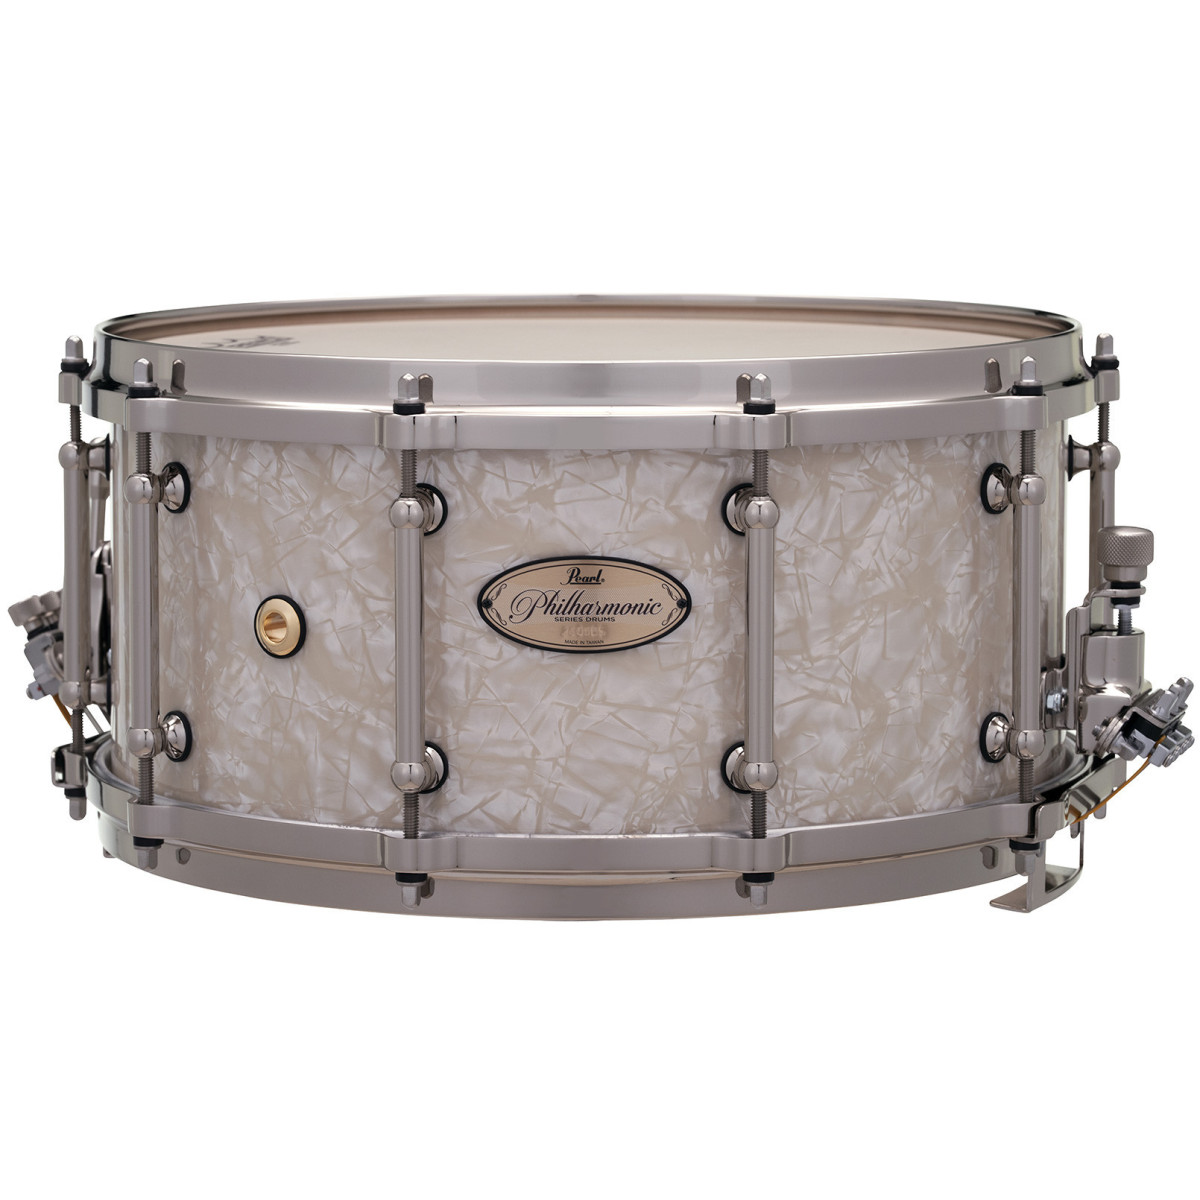 https://www.tamtampercusion.com/44823-superlarge_default/pearl-php1465-philharmonic-concert-maple-nicotine-white-14x65.jpg